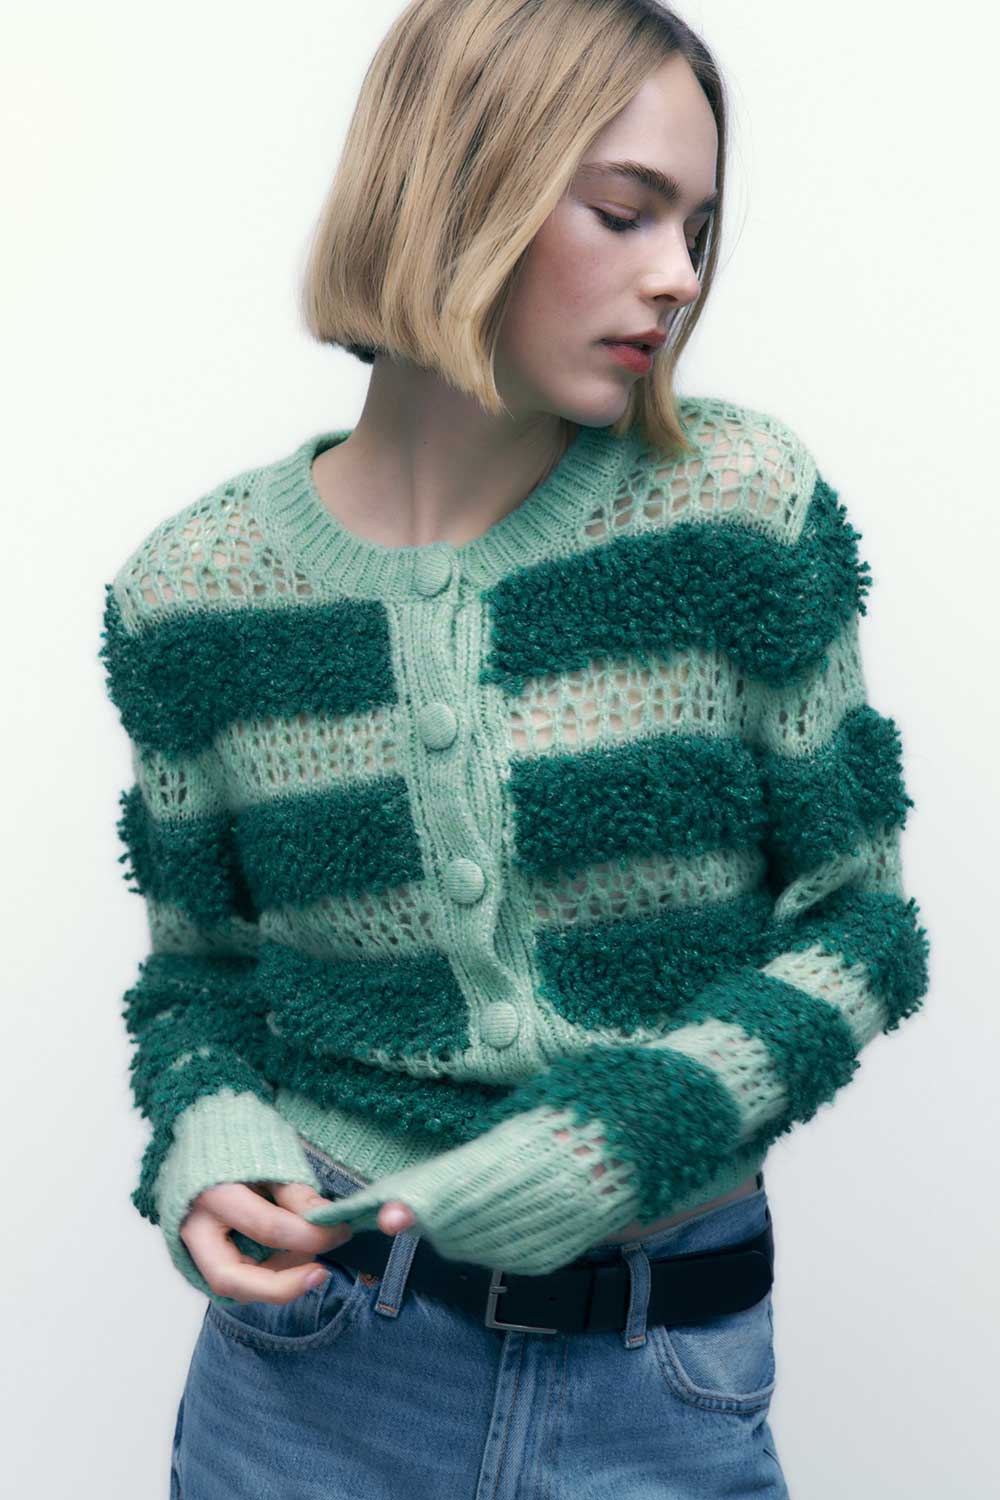 A model seen from the waist up wearing a mint green and teal mohair-blend green cardigan from Zara.